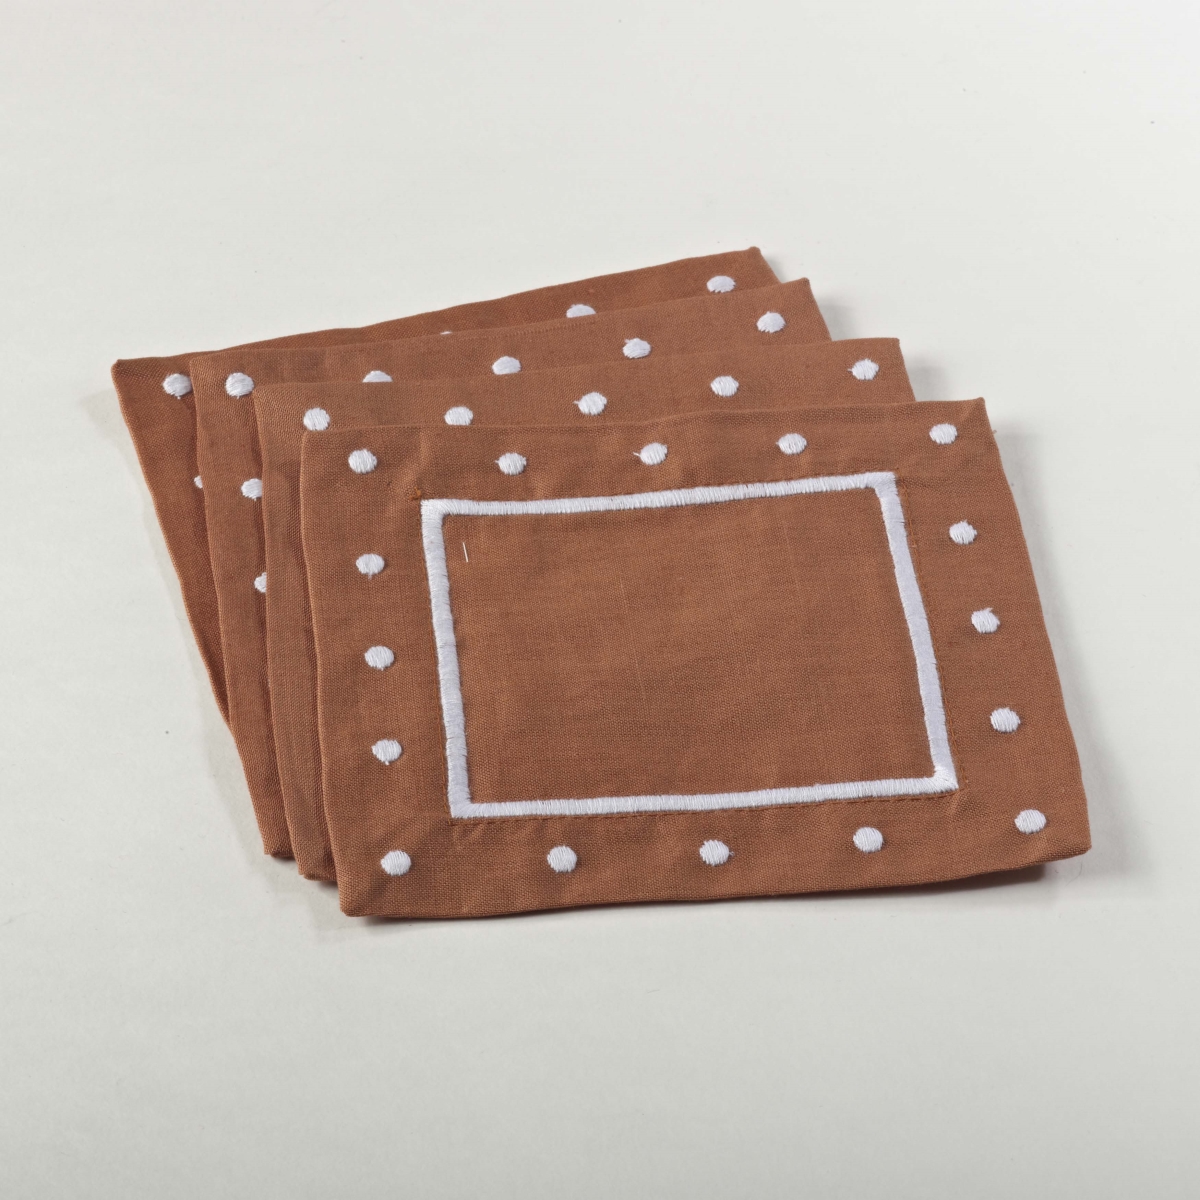 7551.tc6s 6 In. Square Embroidered Coaster With Dotted Border - Terracotta, Set Of 4